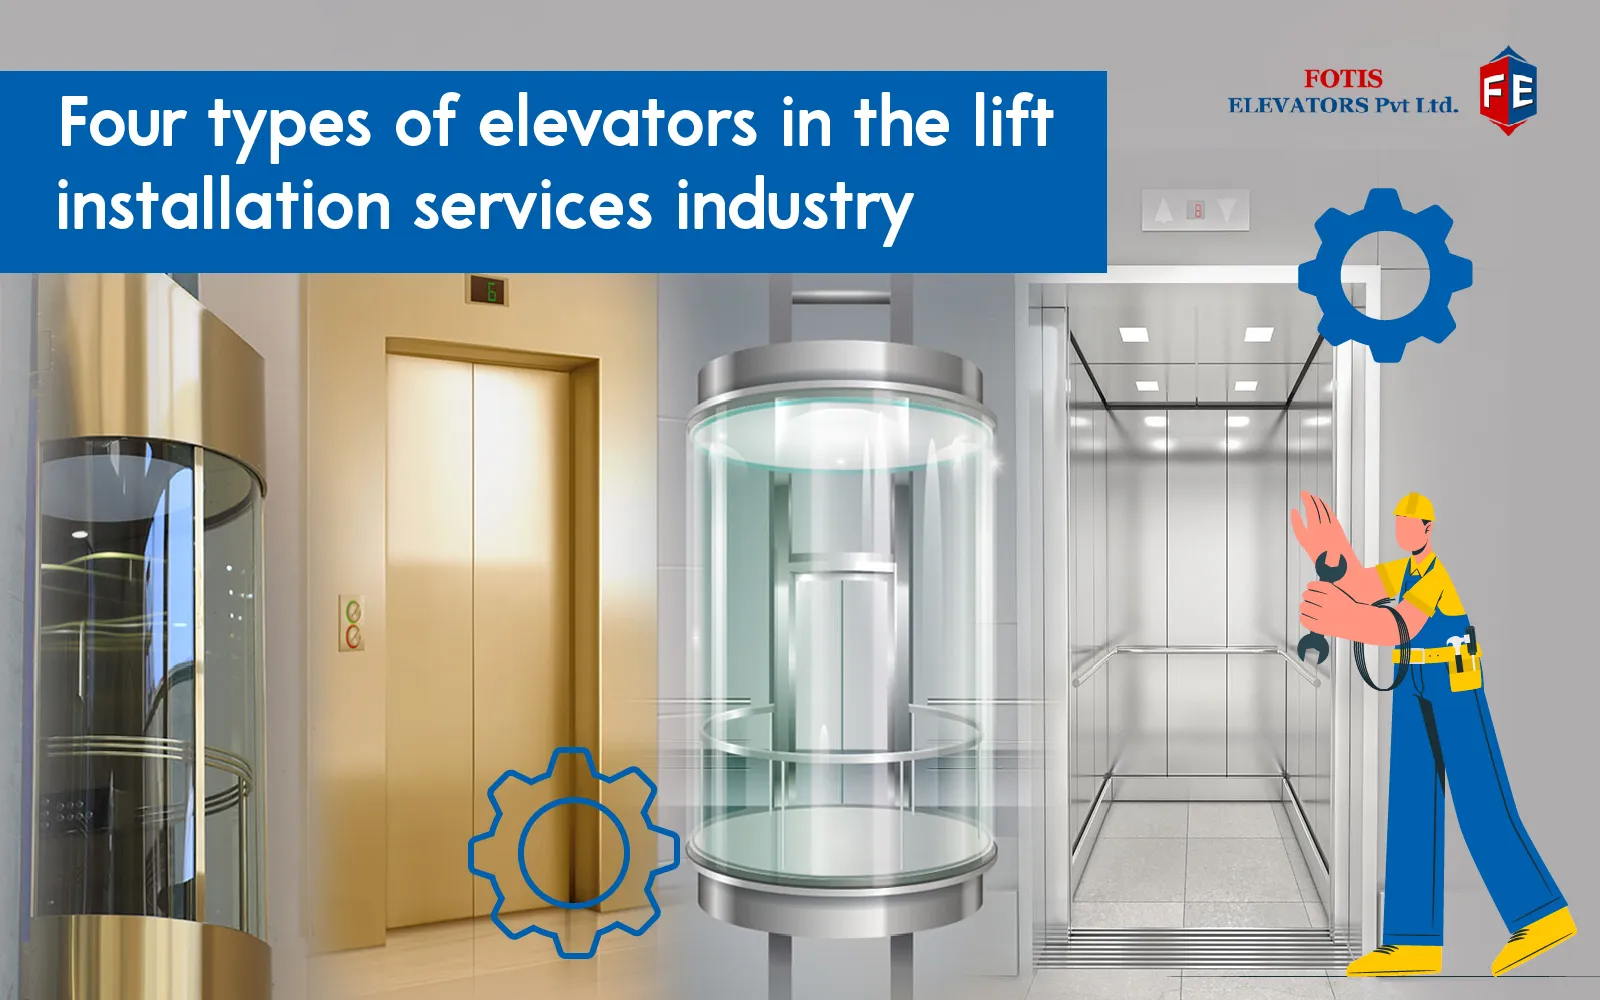 Four types of elevators in the lift installation services industry